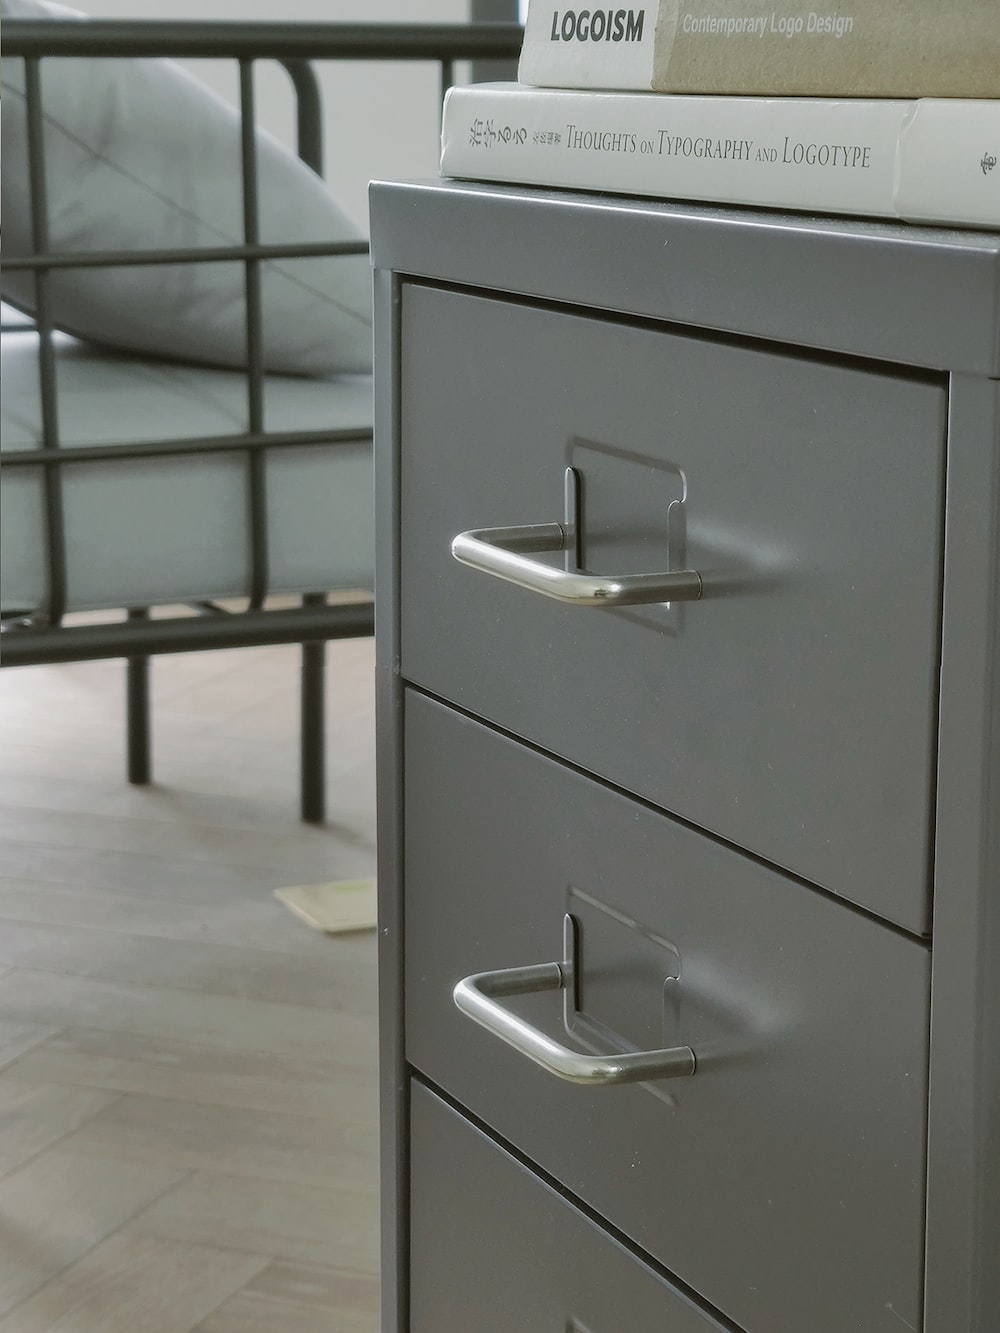 How do you upgrade a metal filing cabinet?